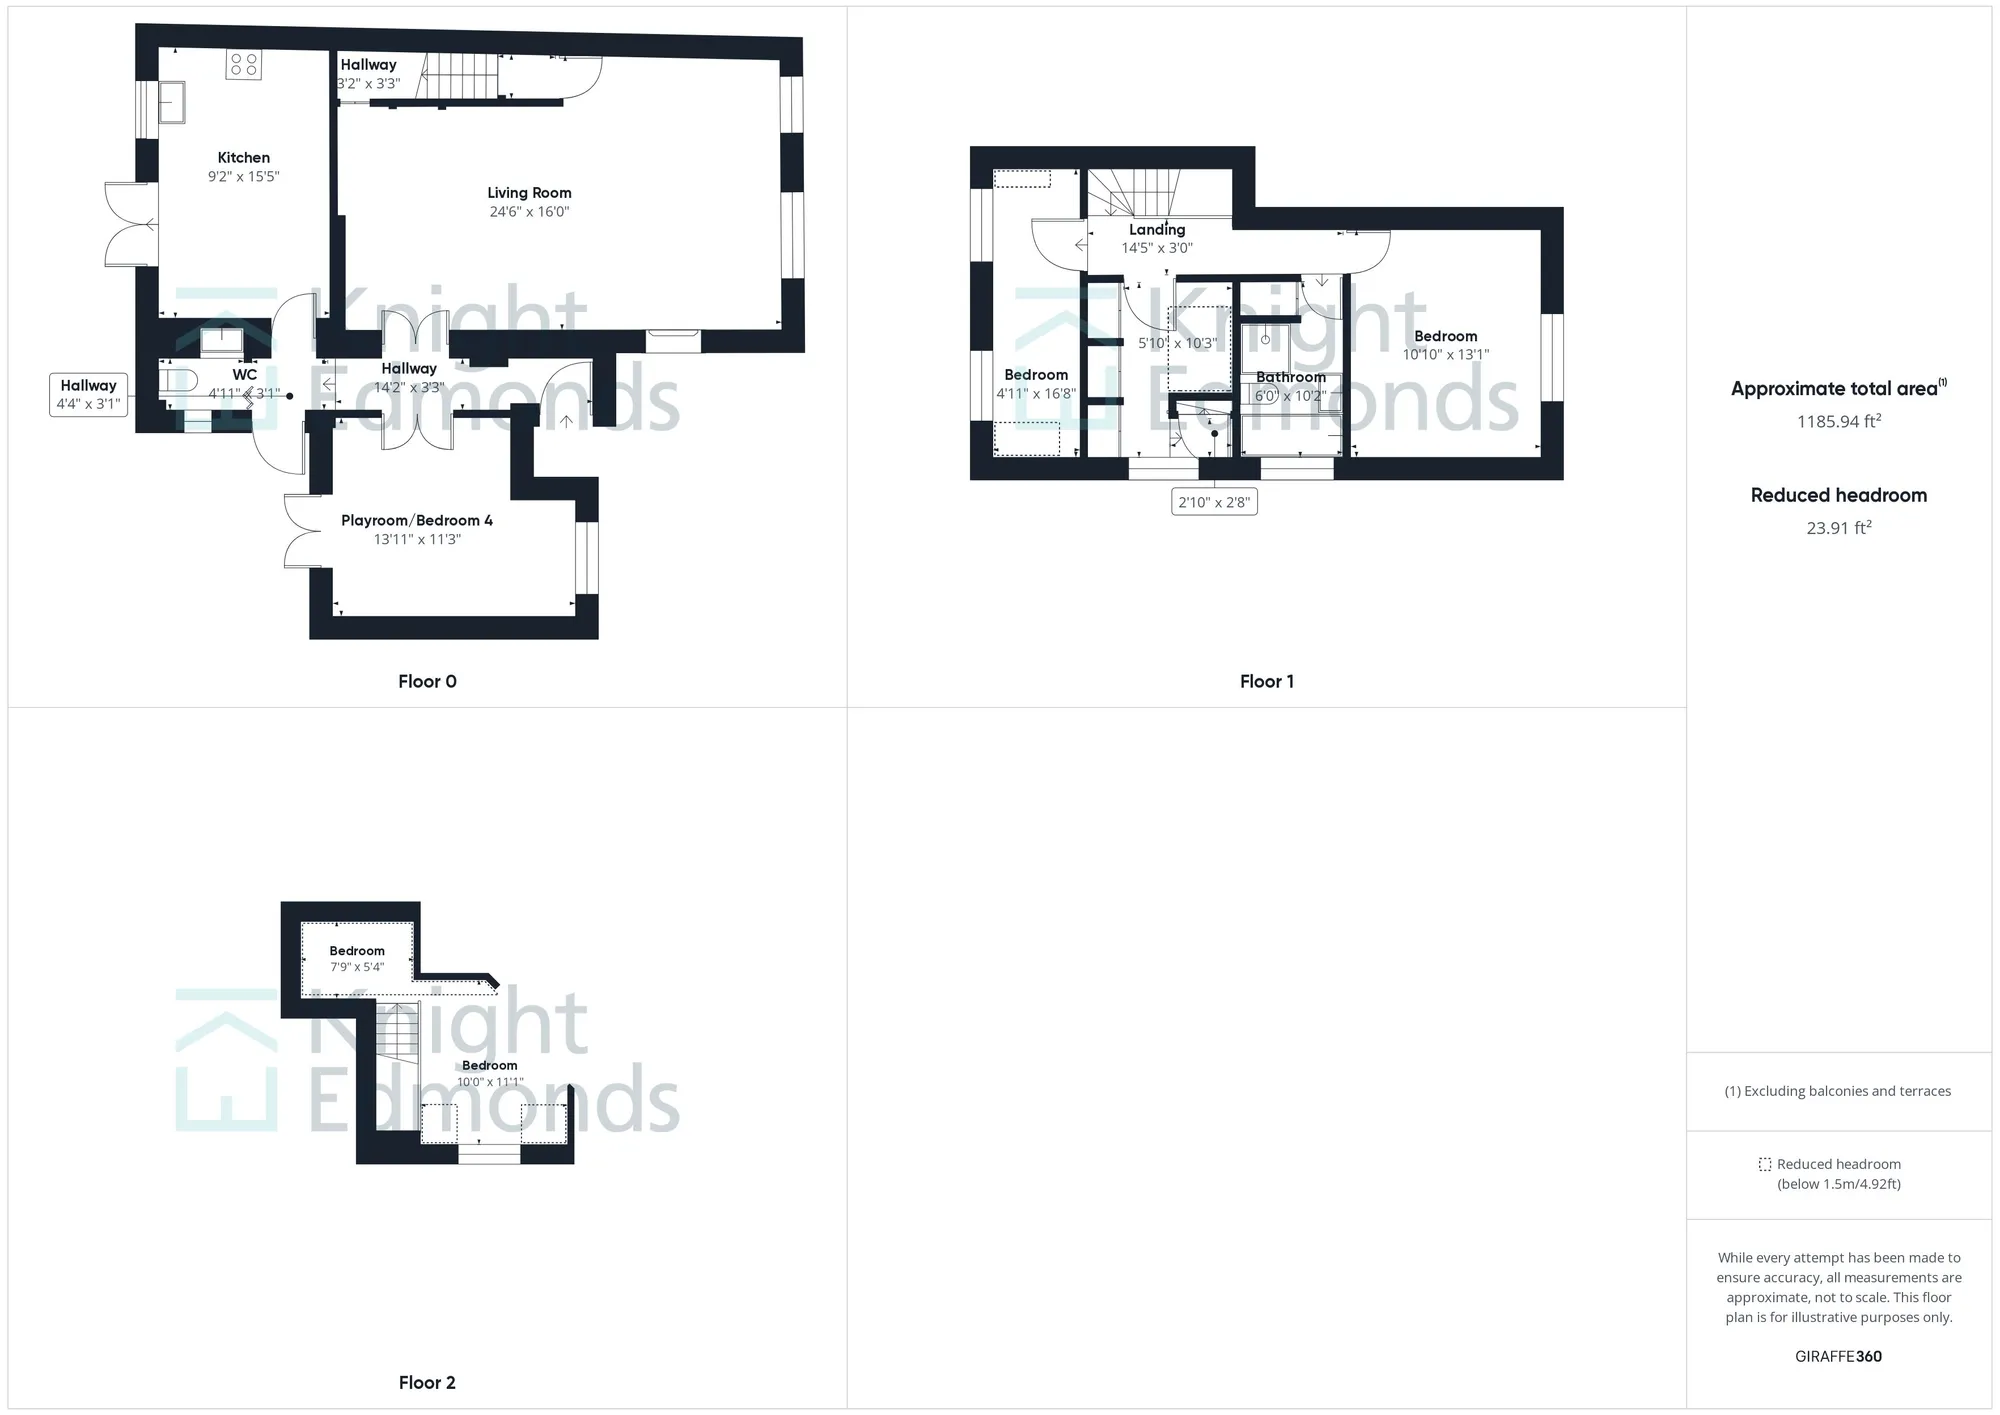 4 bed semi-detached house for sale in Lower Road, Maidstone - Property floorplan